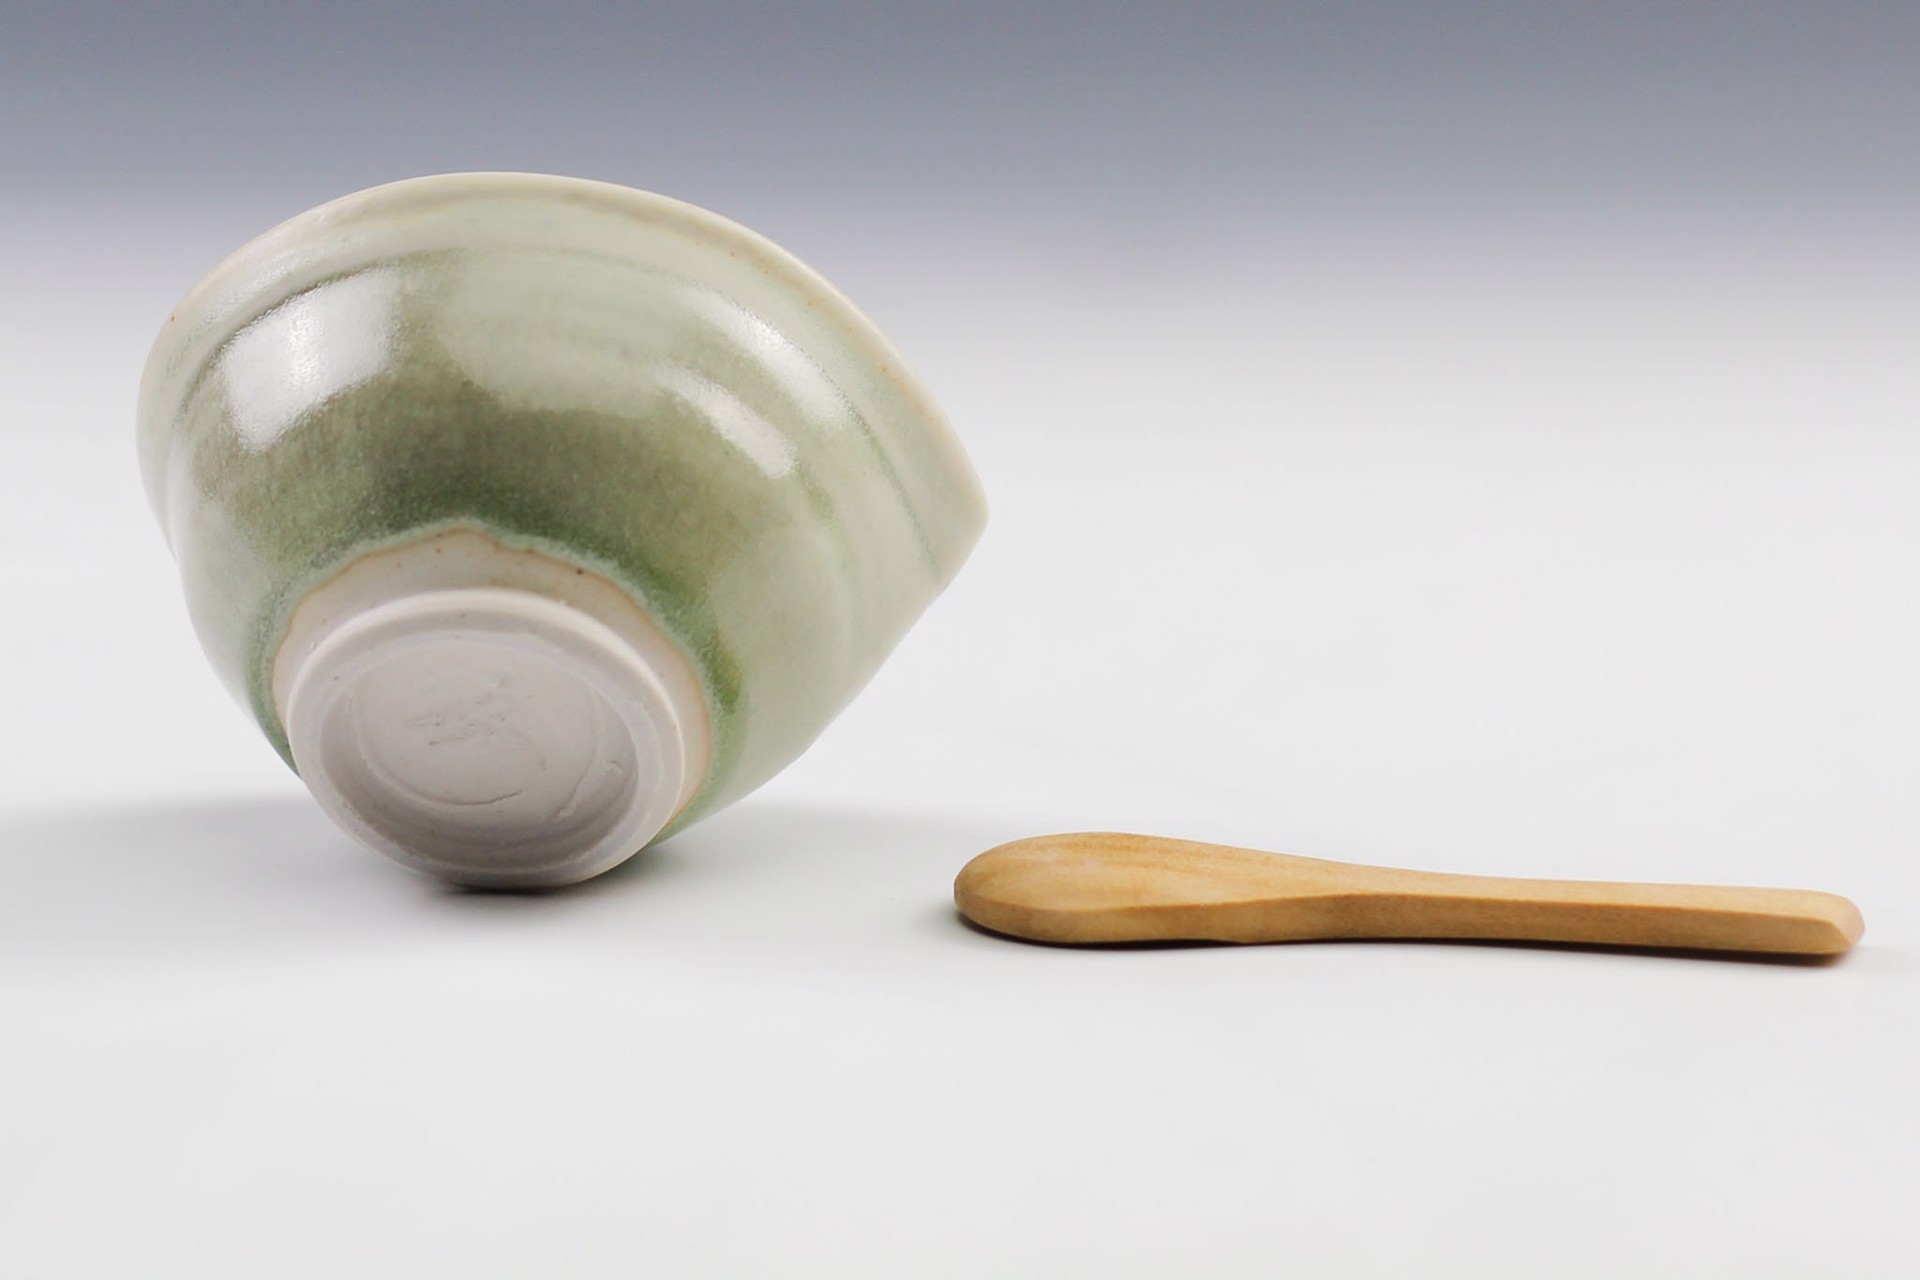 Small Condiment Bowl with Spoon by Delores Fortuna